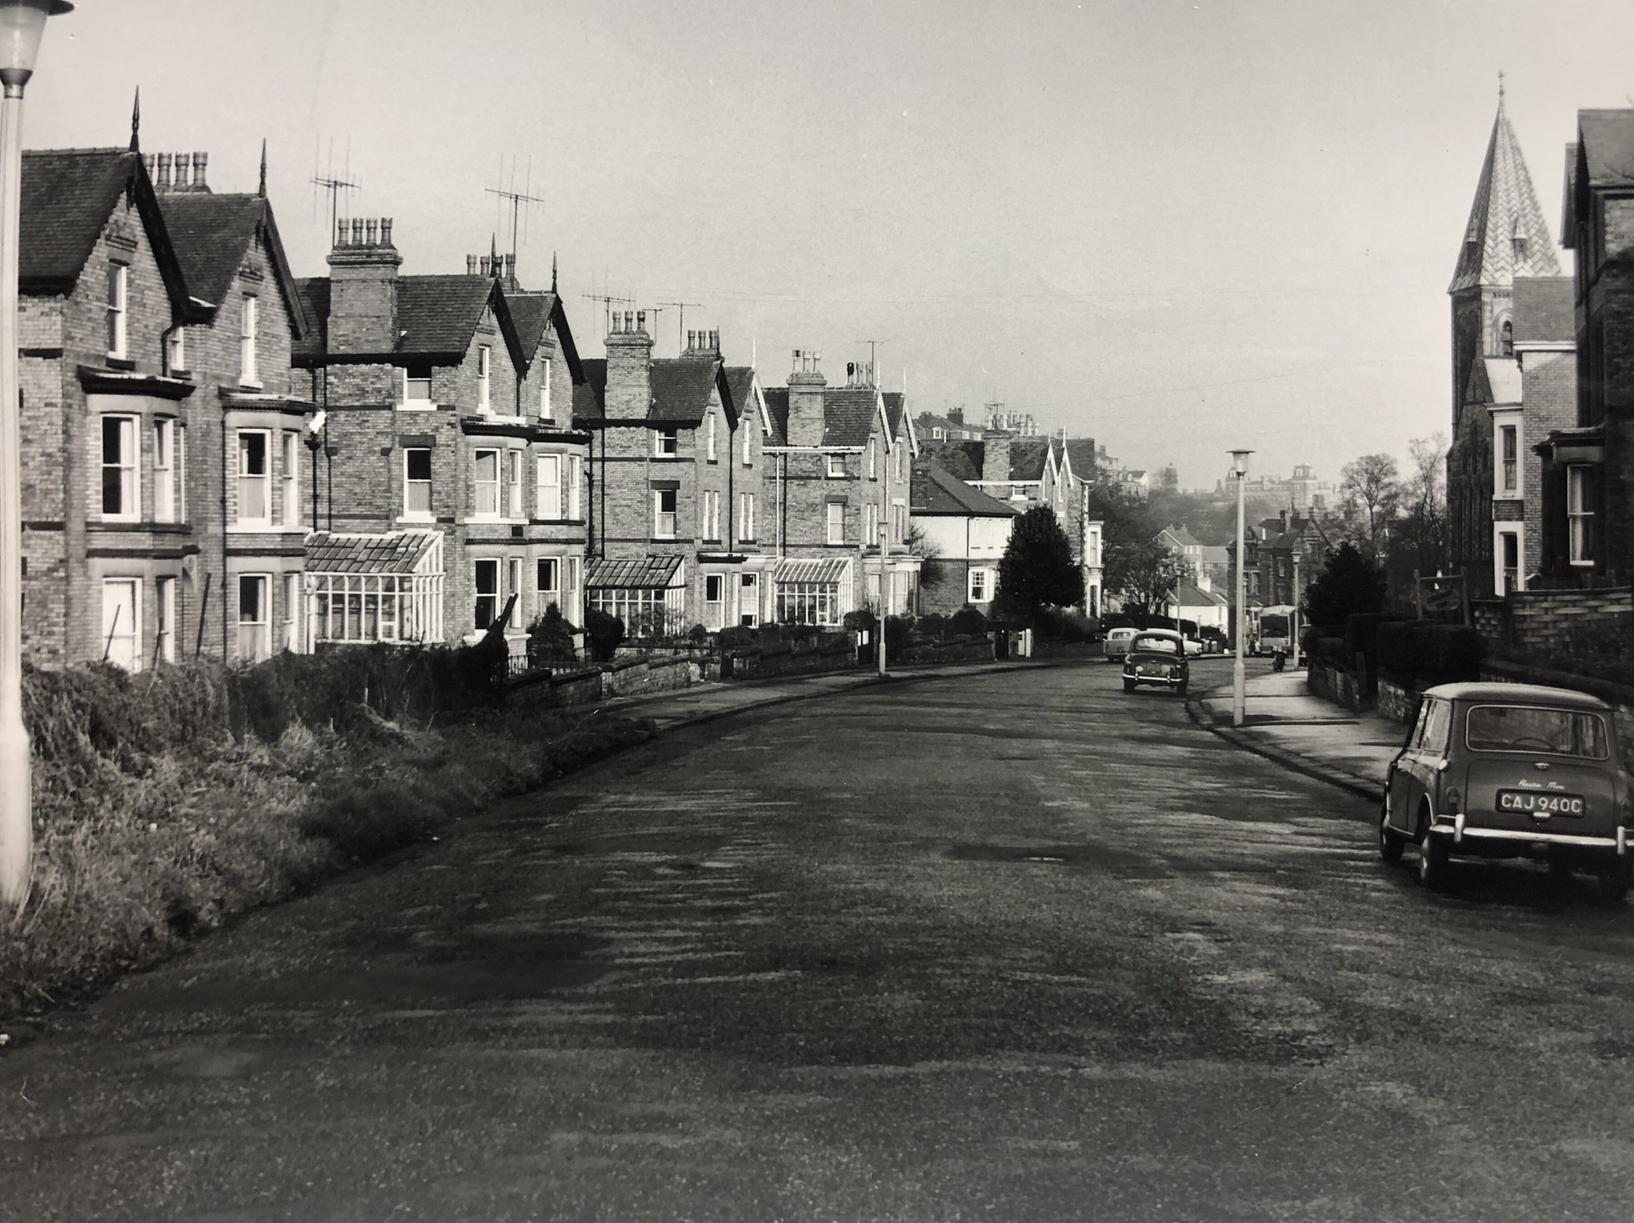 Taken in February 1967, the road hasnt changed much since this photo was taken. The buildings are all still there, the church has since been converted into flats. However the cars and street lamps show the passing years.